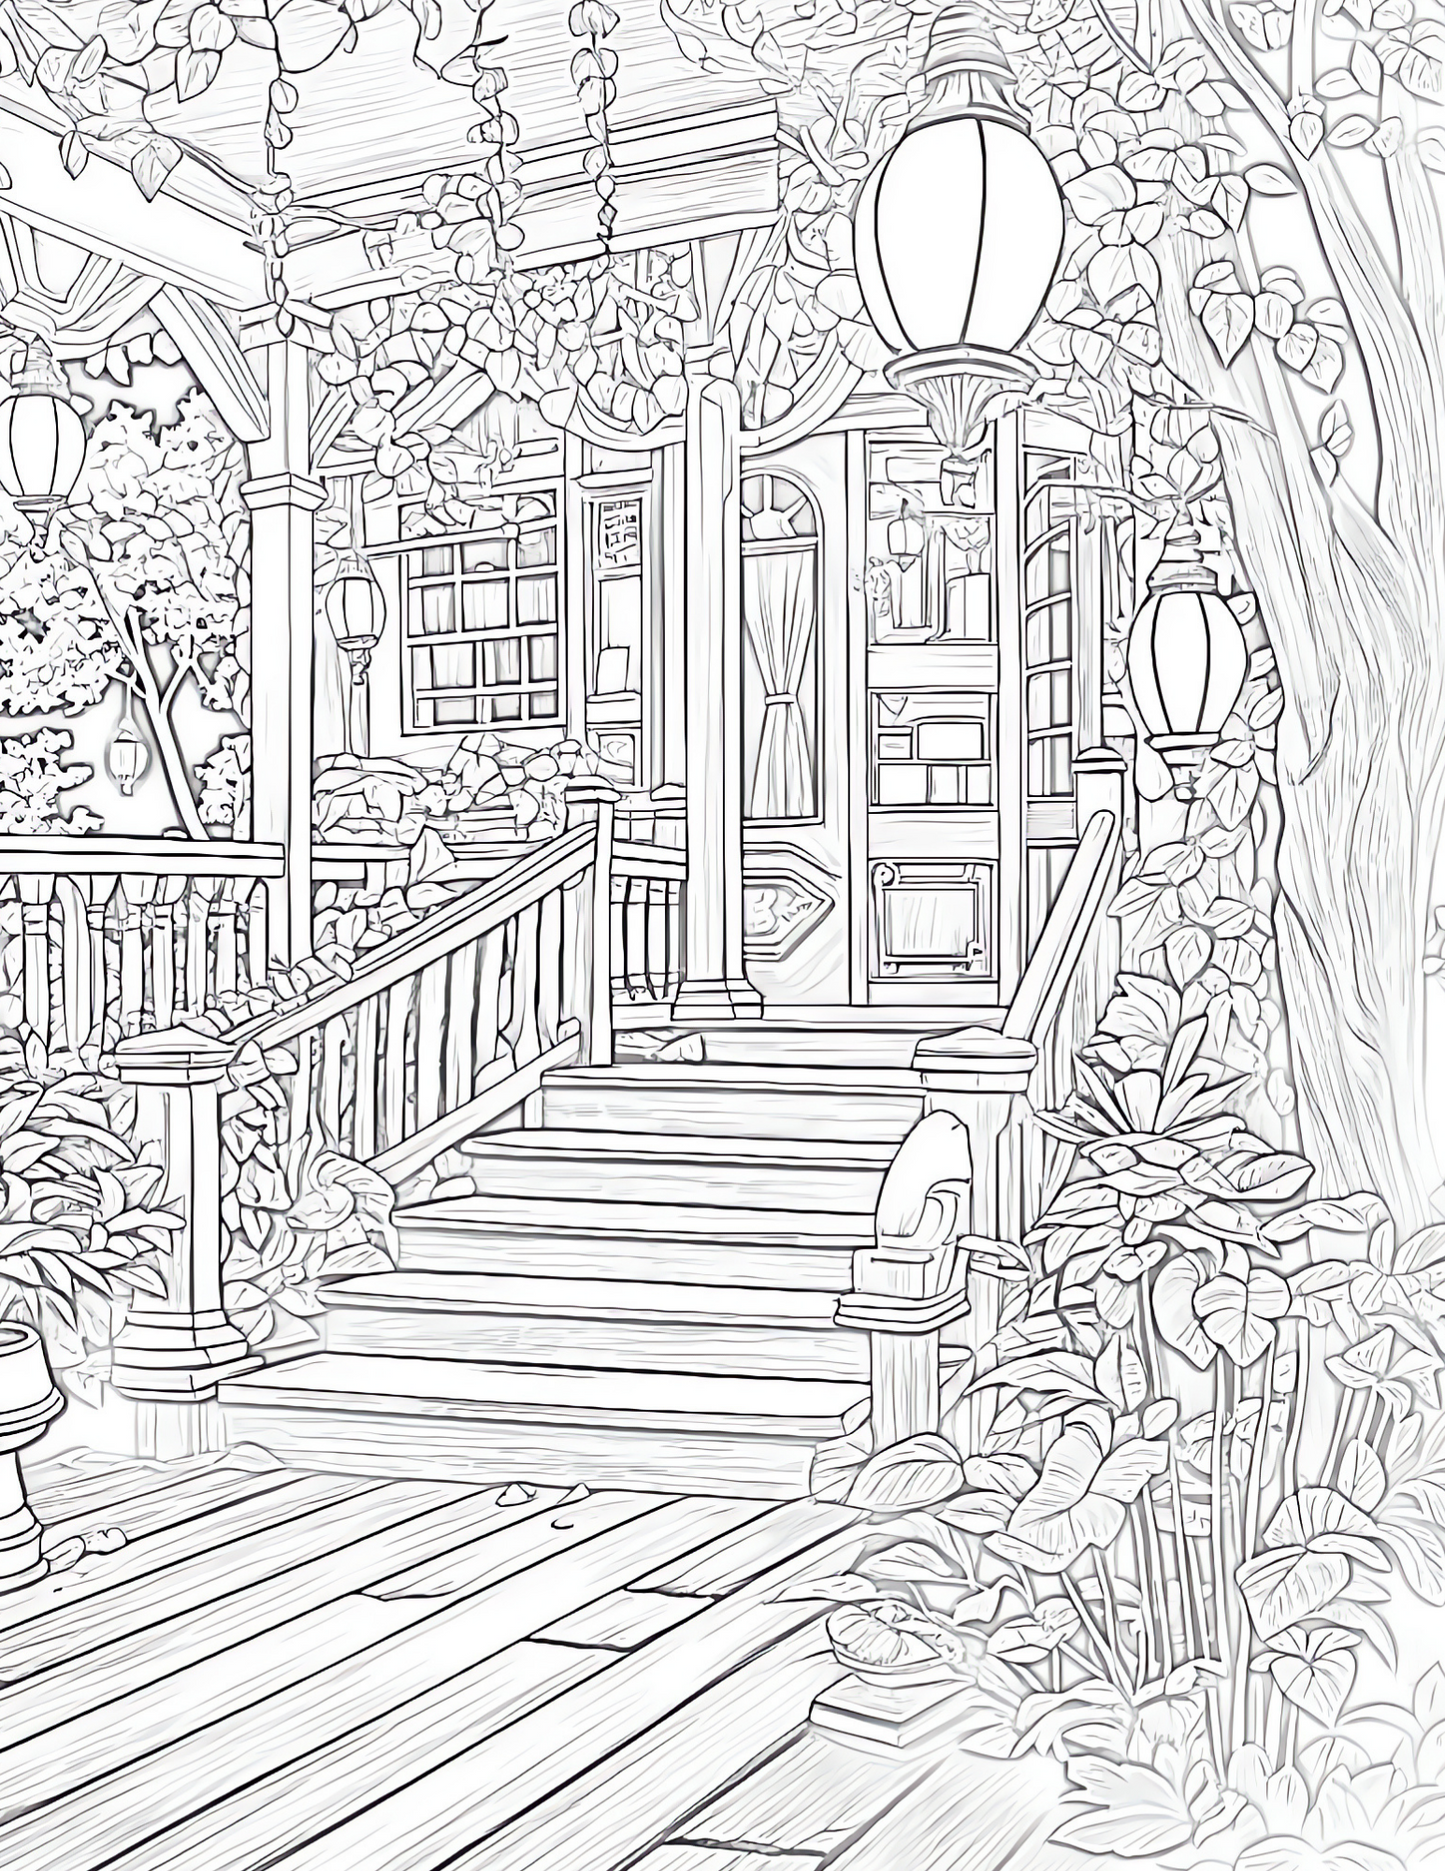 garden home coloring pages with lights outdoor scene coloring pages